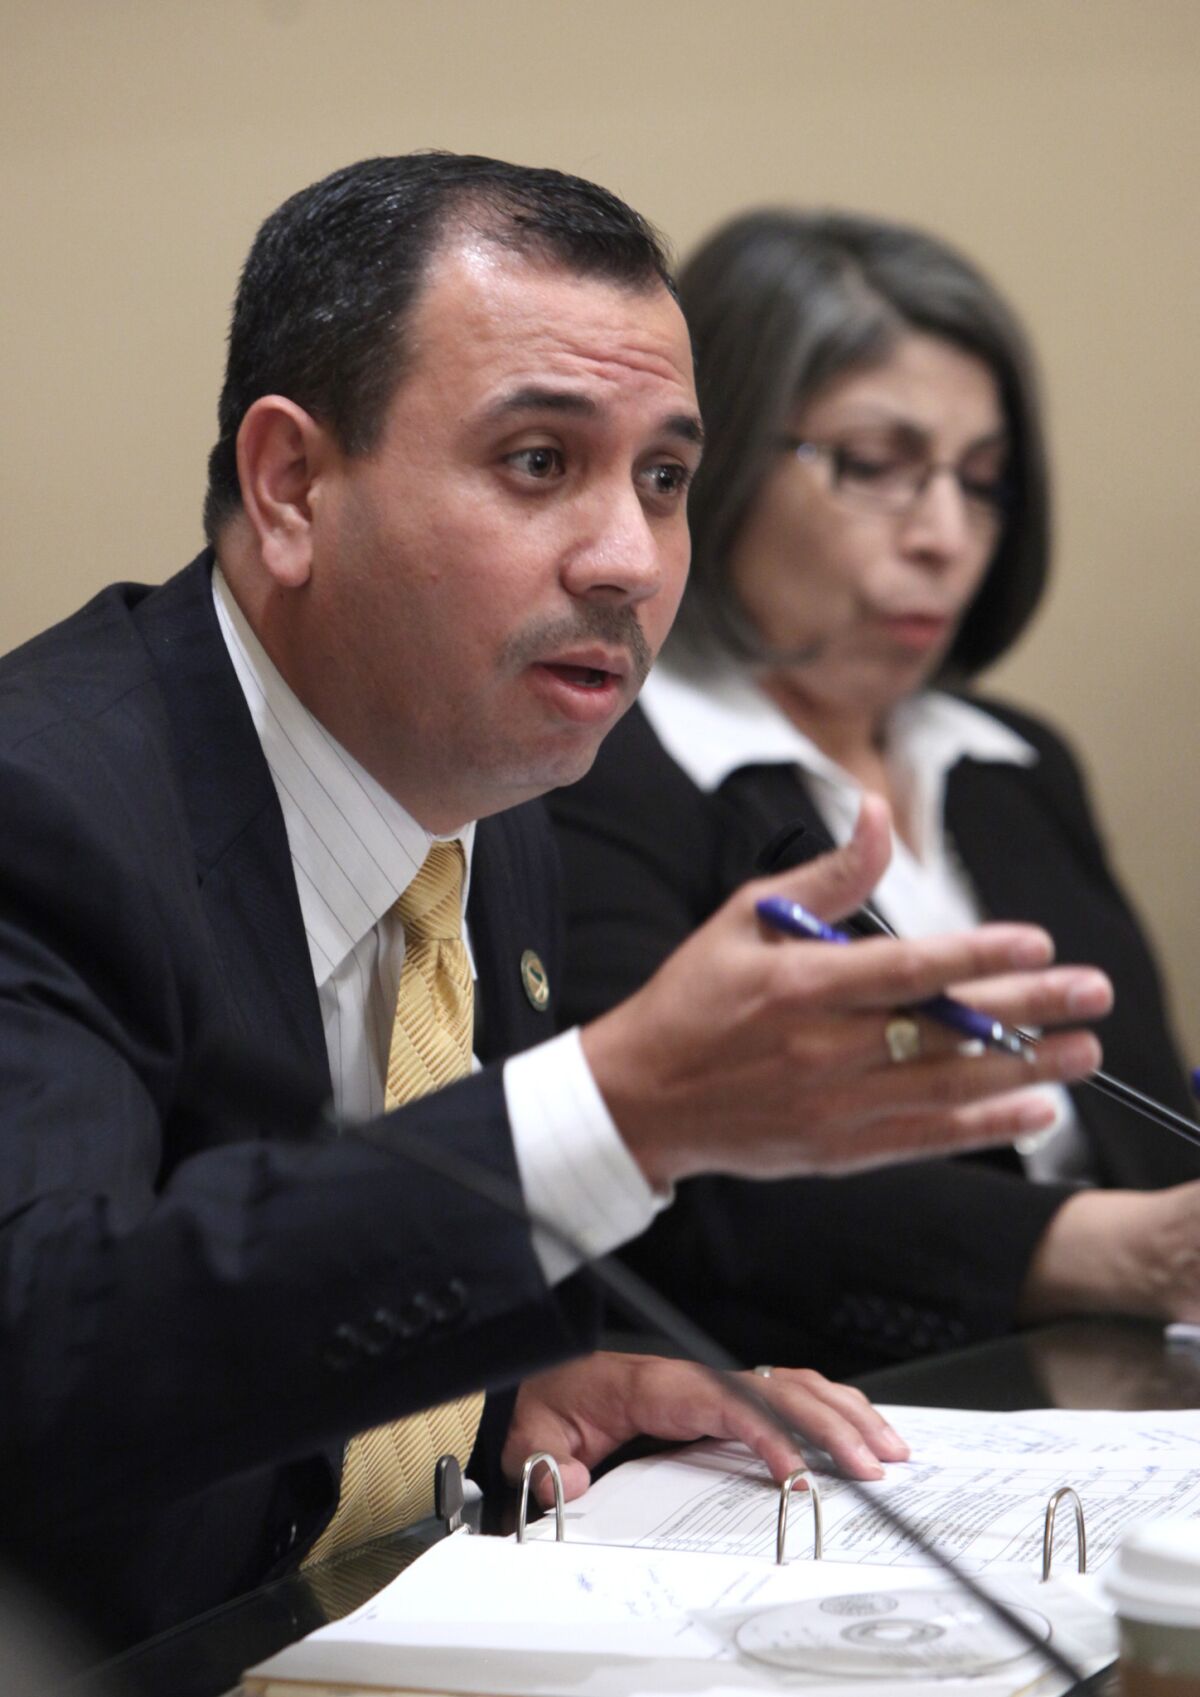 Sen. Tony Mendoza, D-Artesia, wants to expand the Los Angeles County Board of Supervisors from five to seven members.